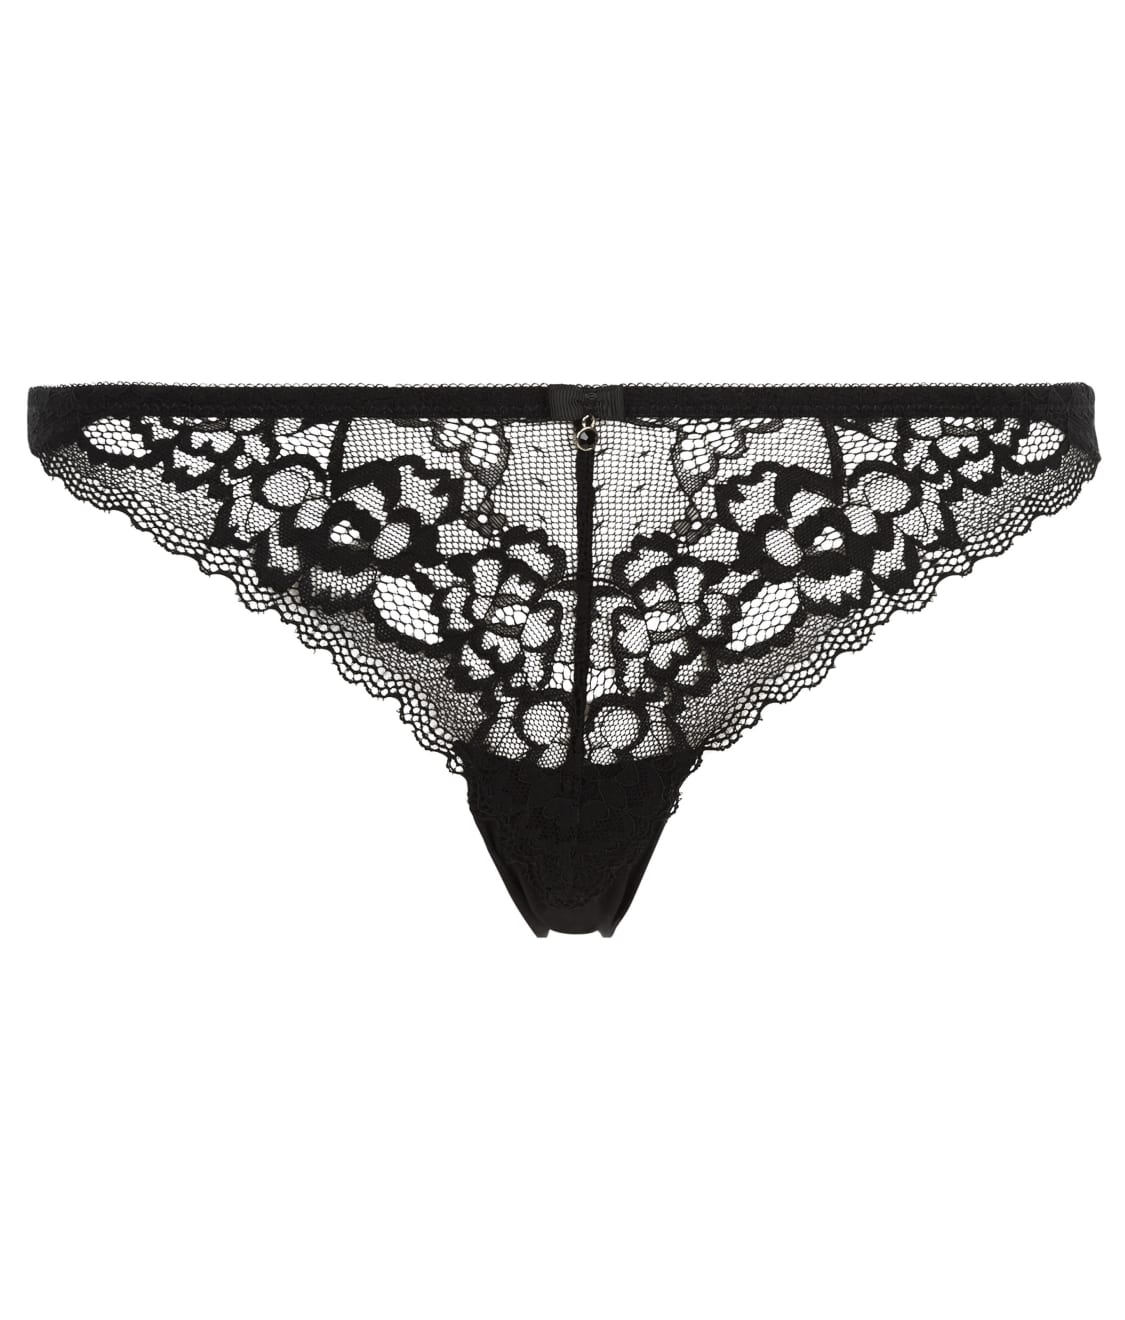 Ann Summers Sexy Lace String Brazillian & Reviews | Bare Necessities ...